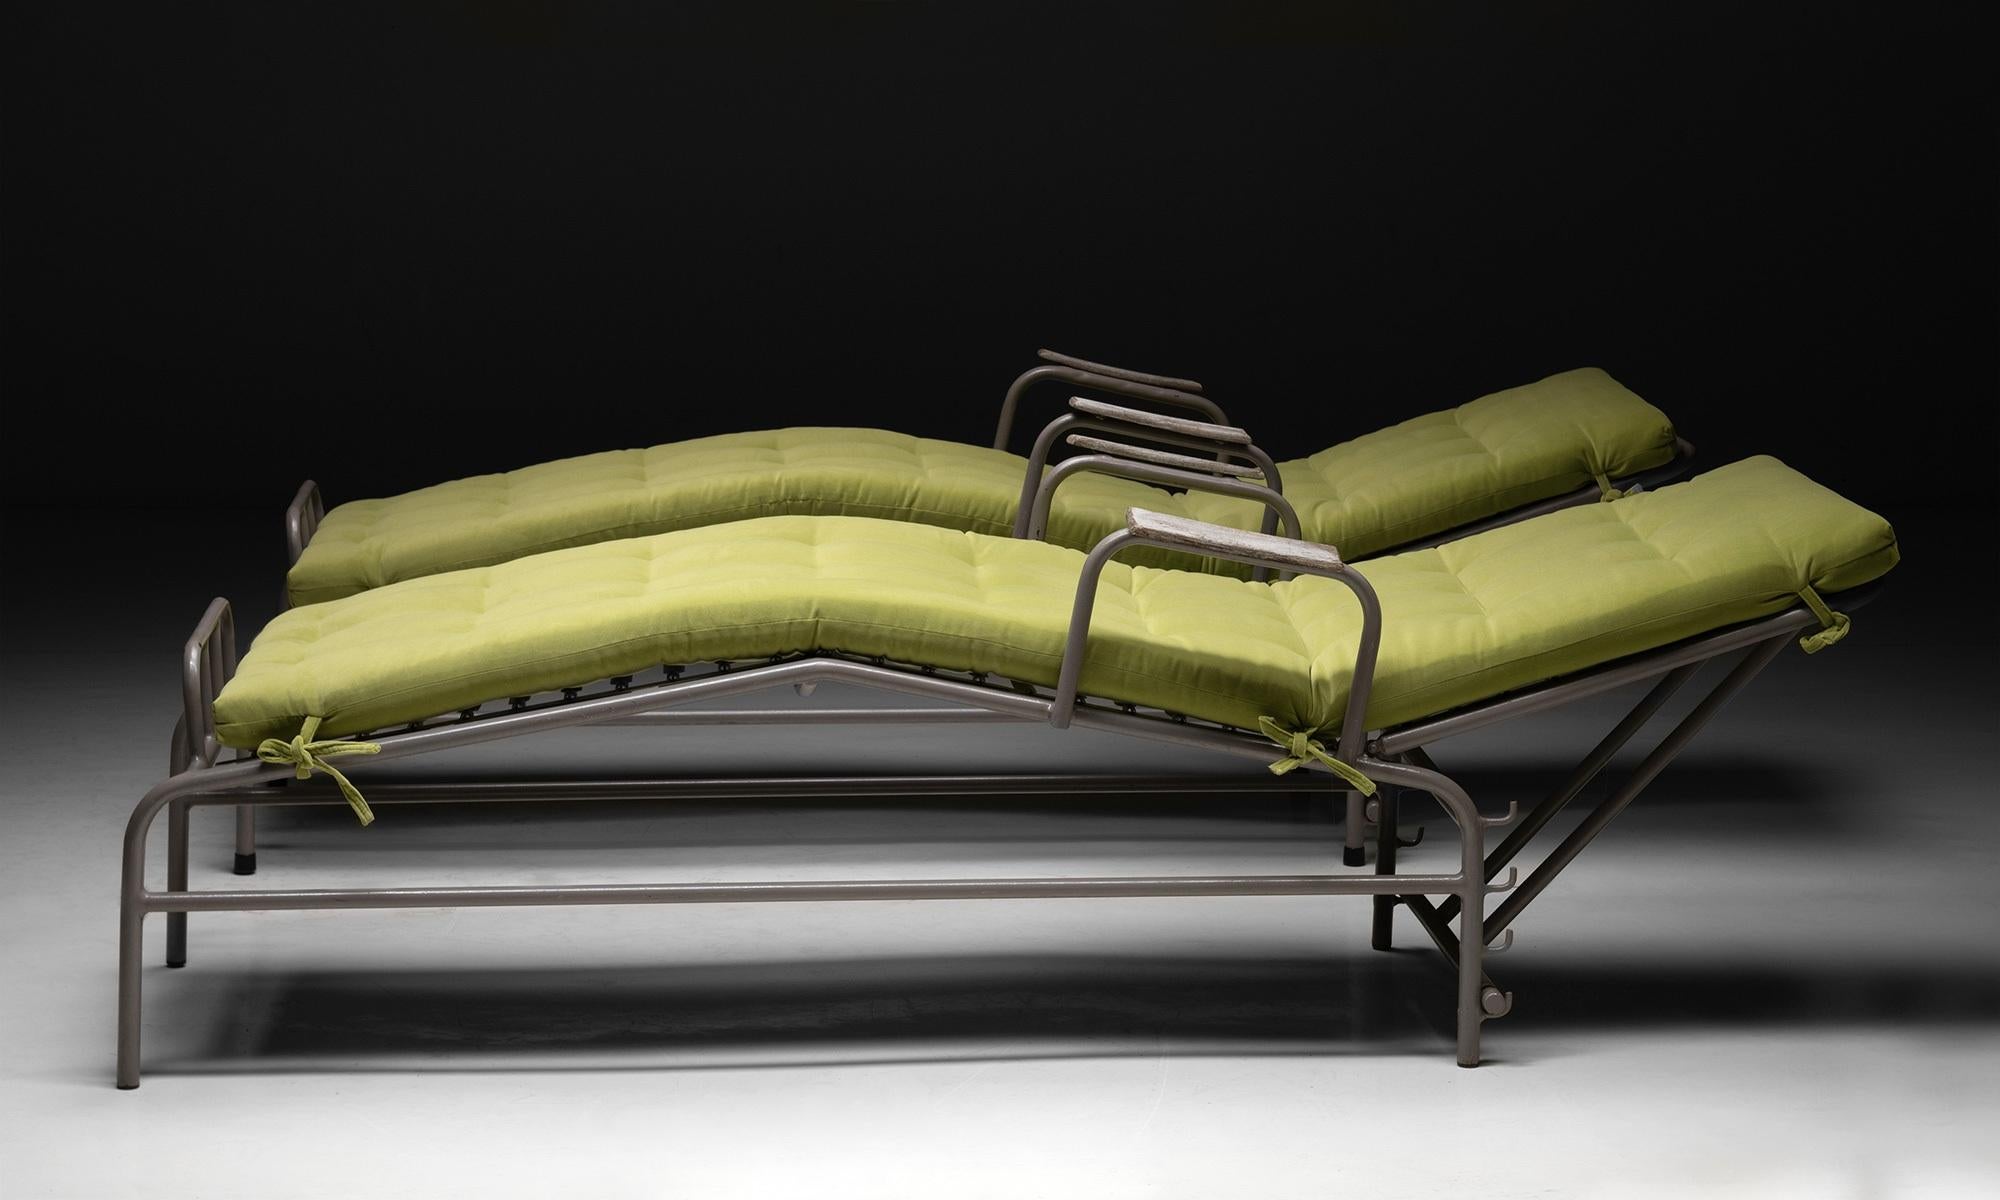 French Modernist Chaise Lounge, France, circa 1950